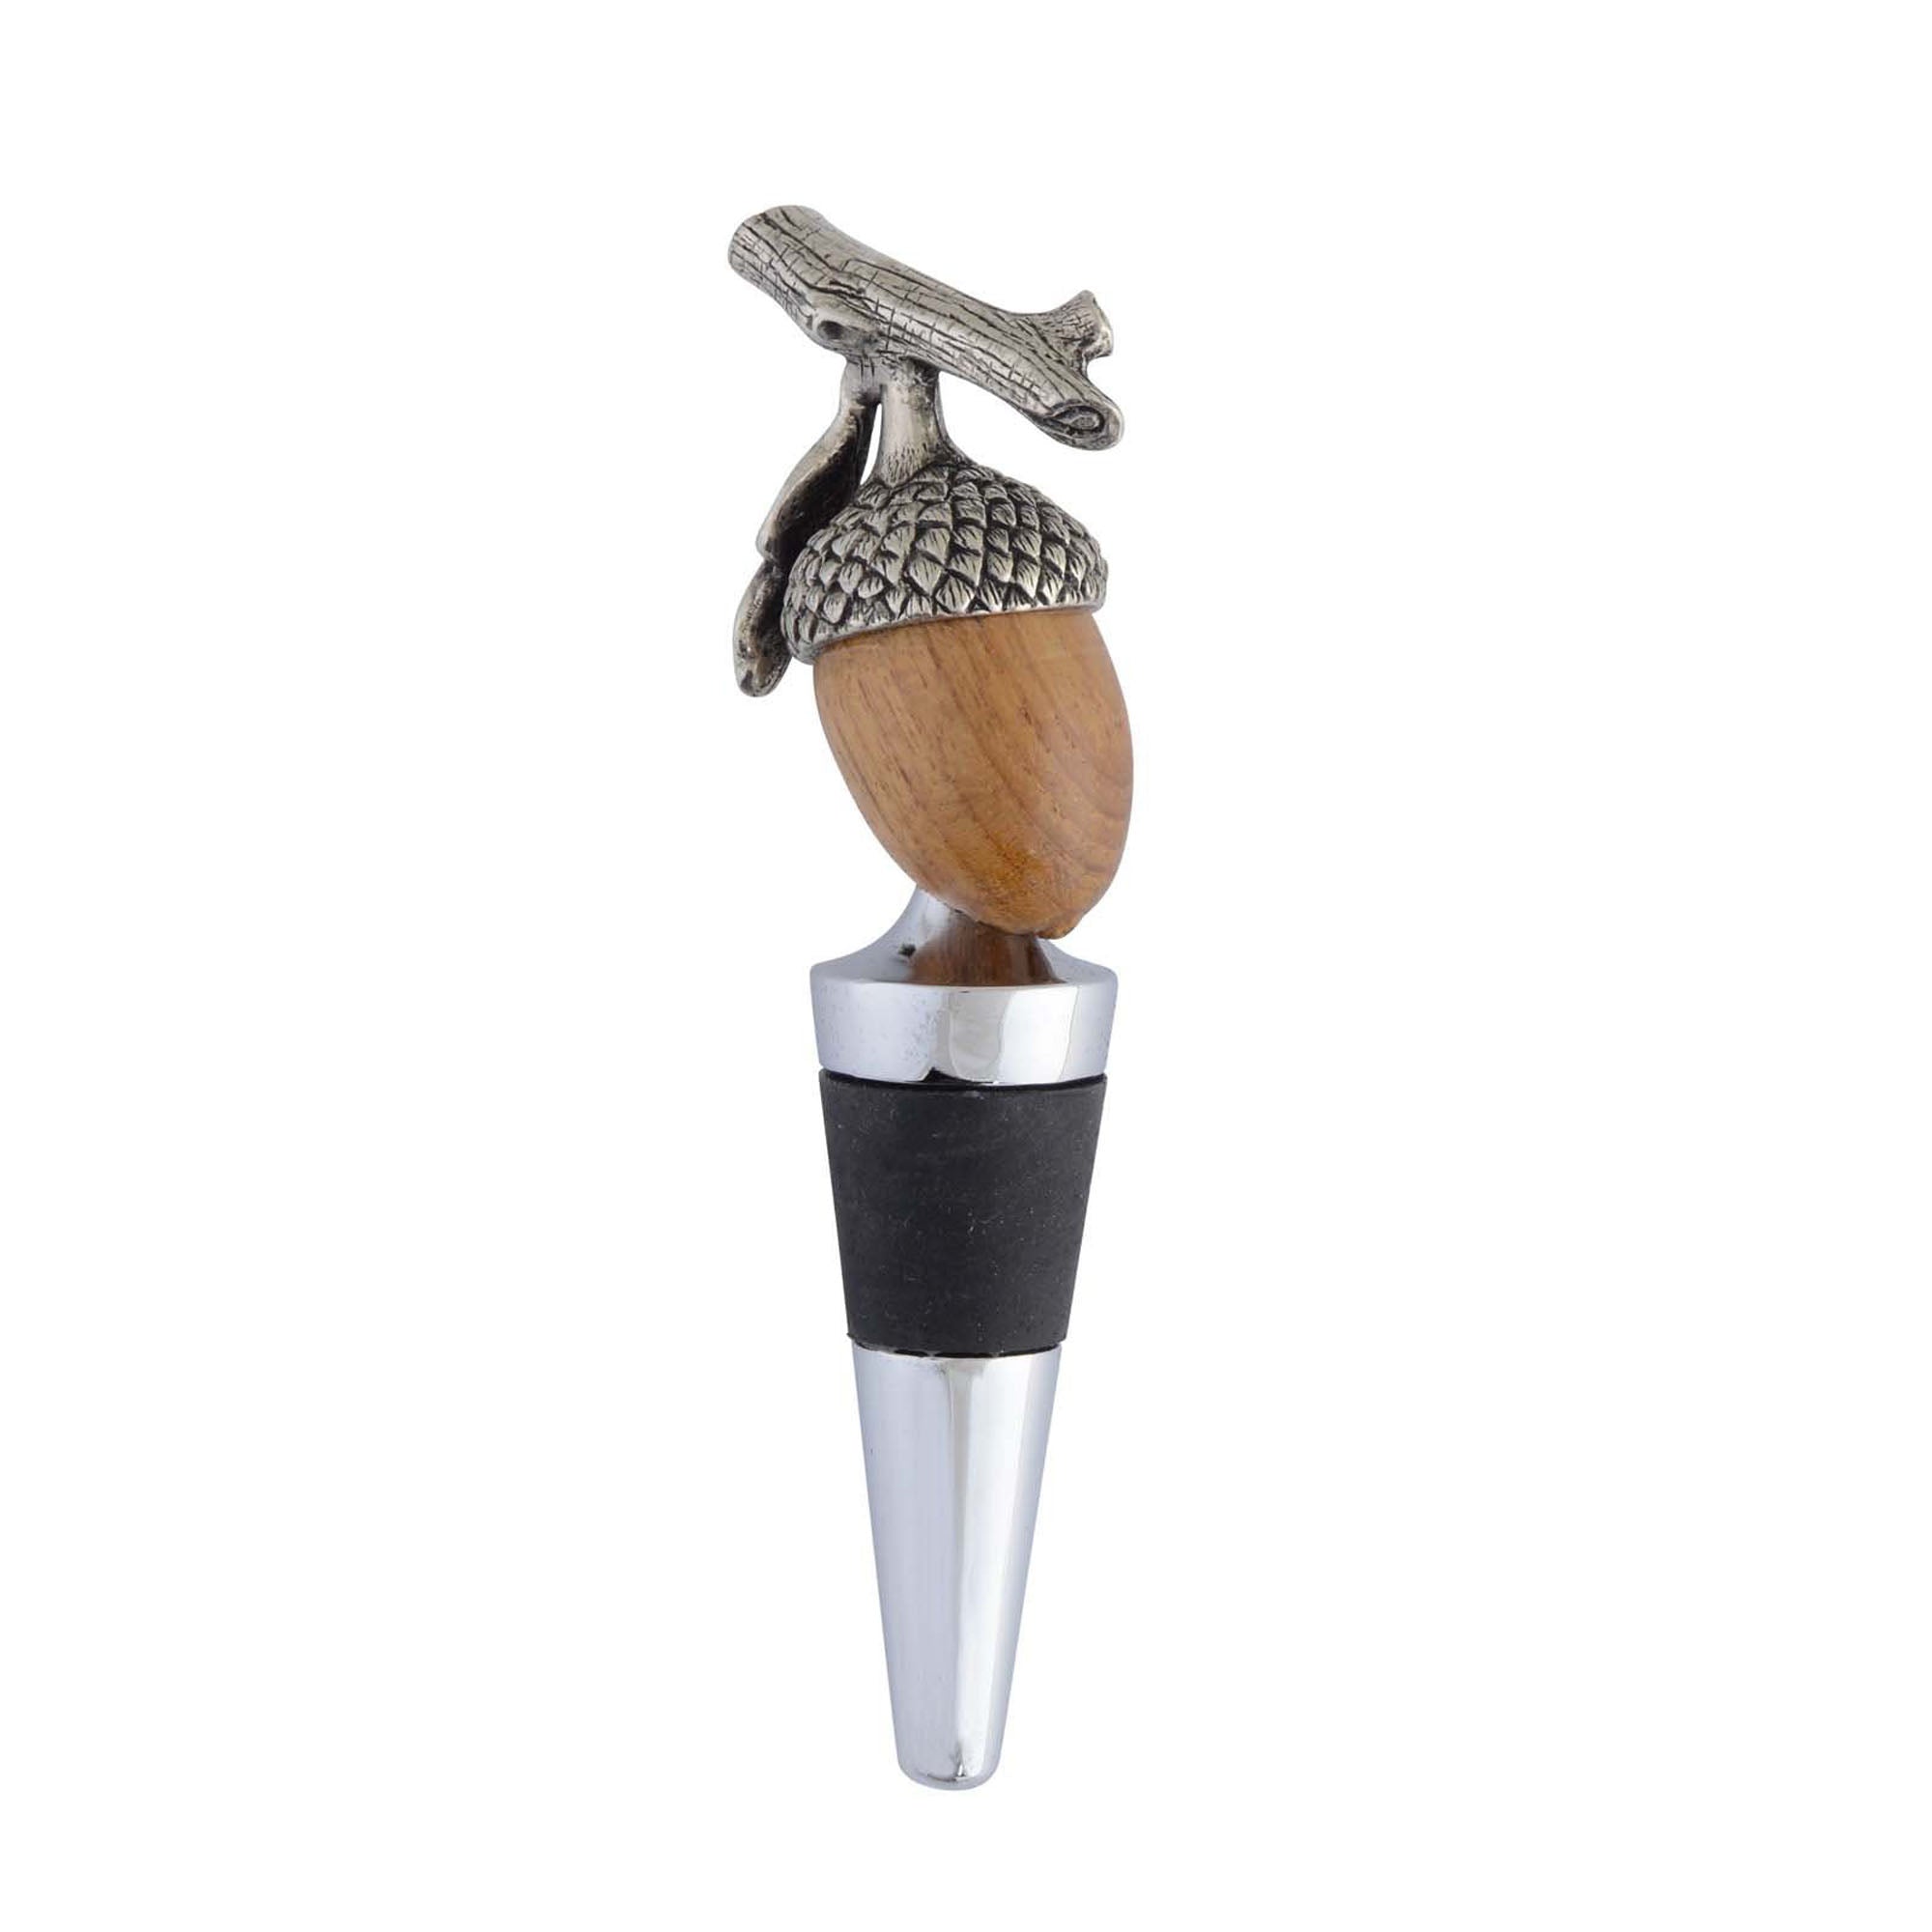 Vagabond House Pewter  and Wood Acorn Bottle Stopper Product Image